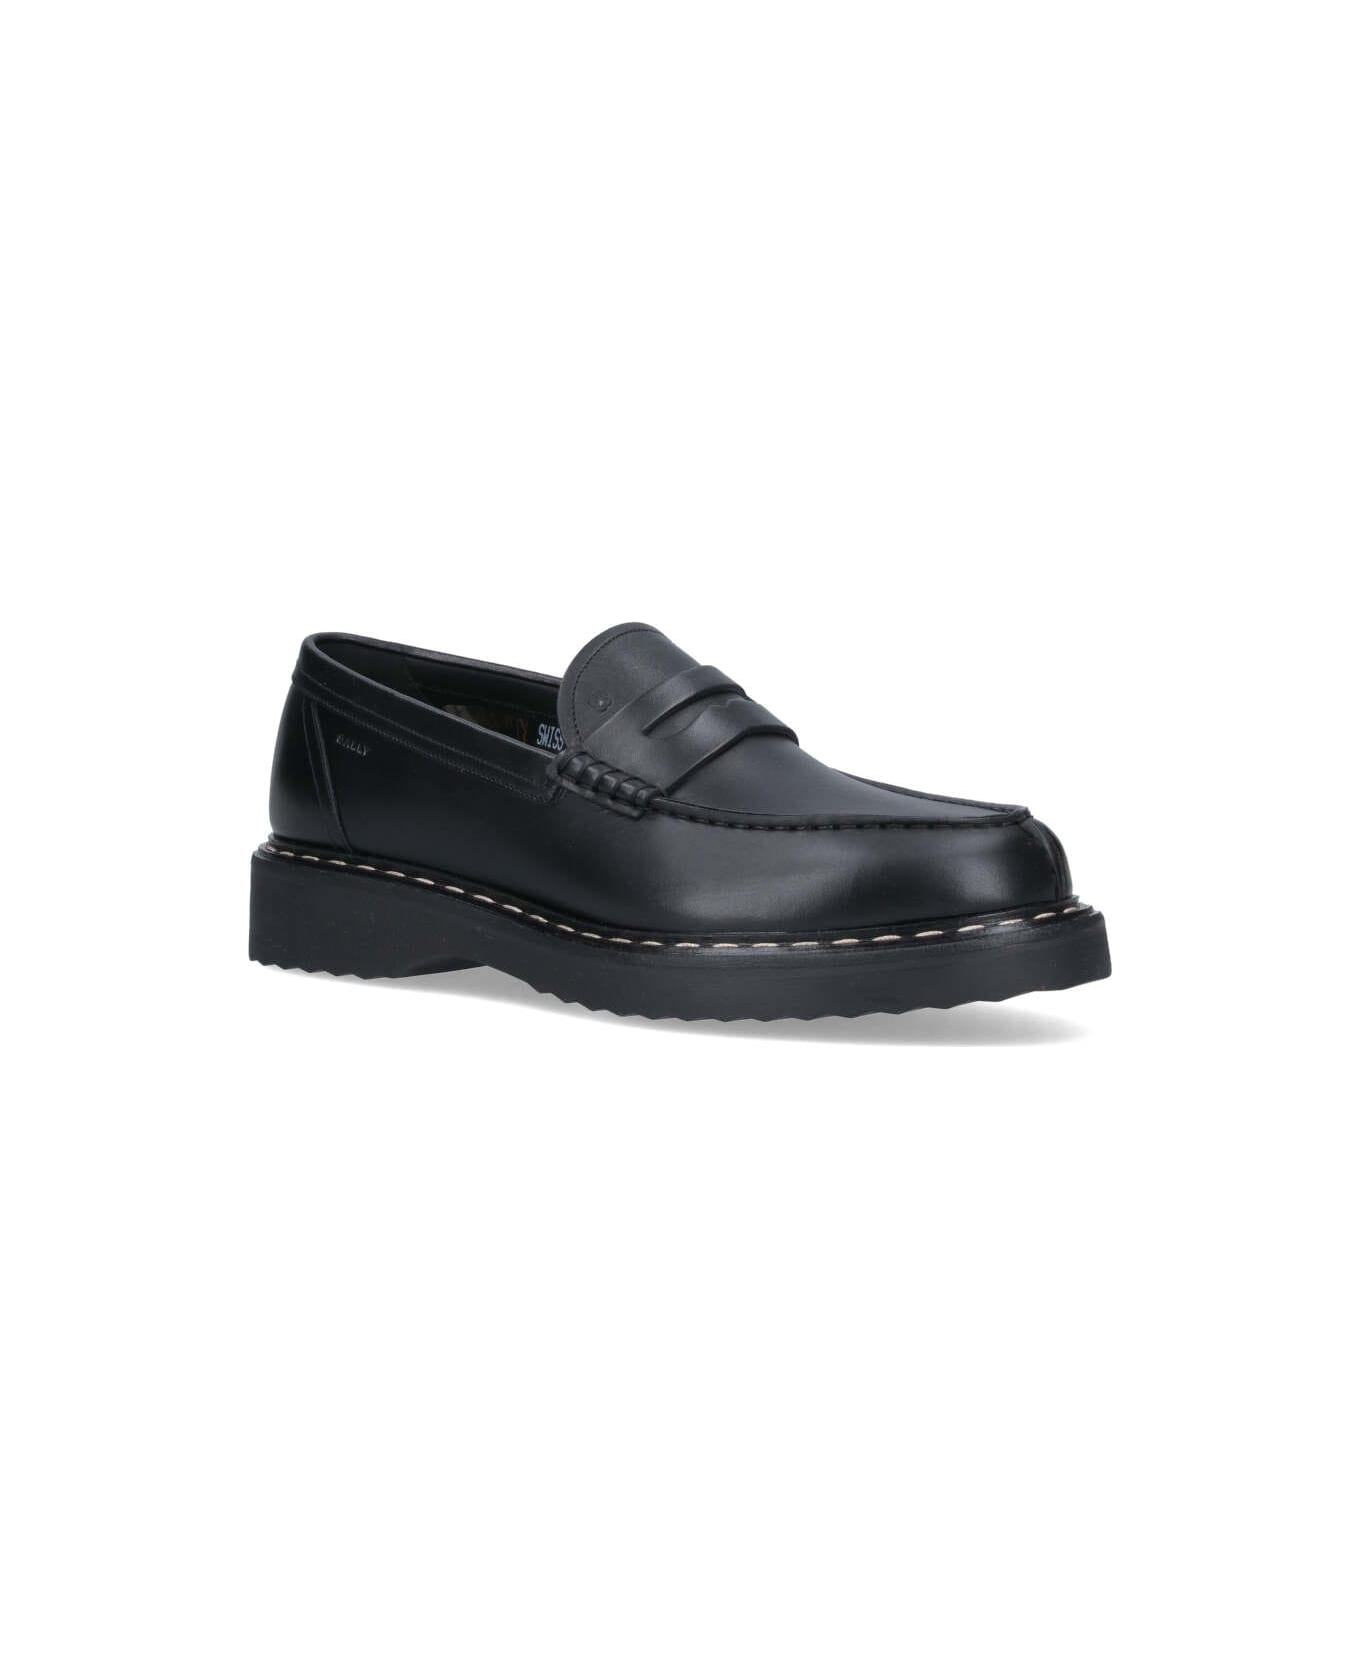 Bally Leather Loafers - Black   ローファー＆デッキシューズ